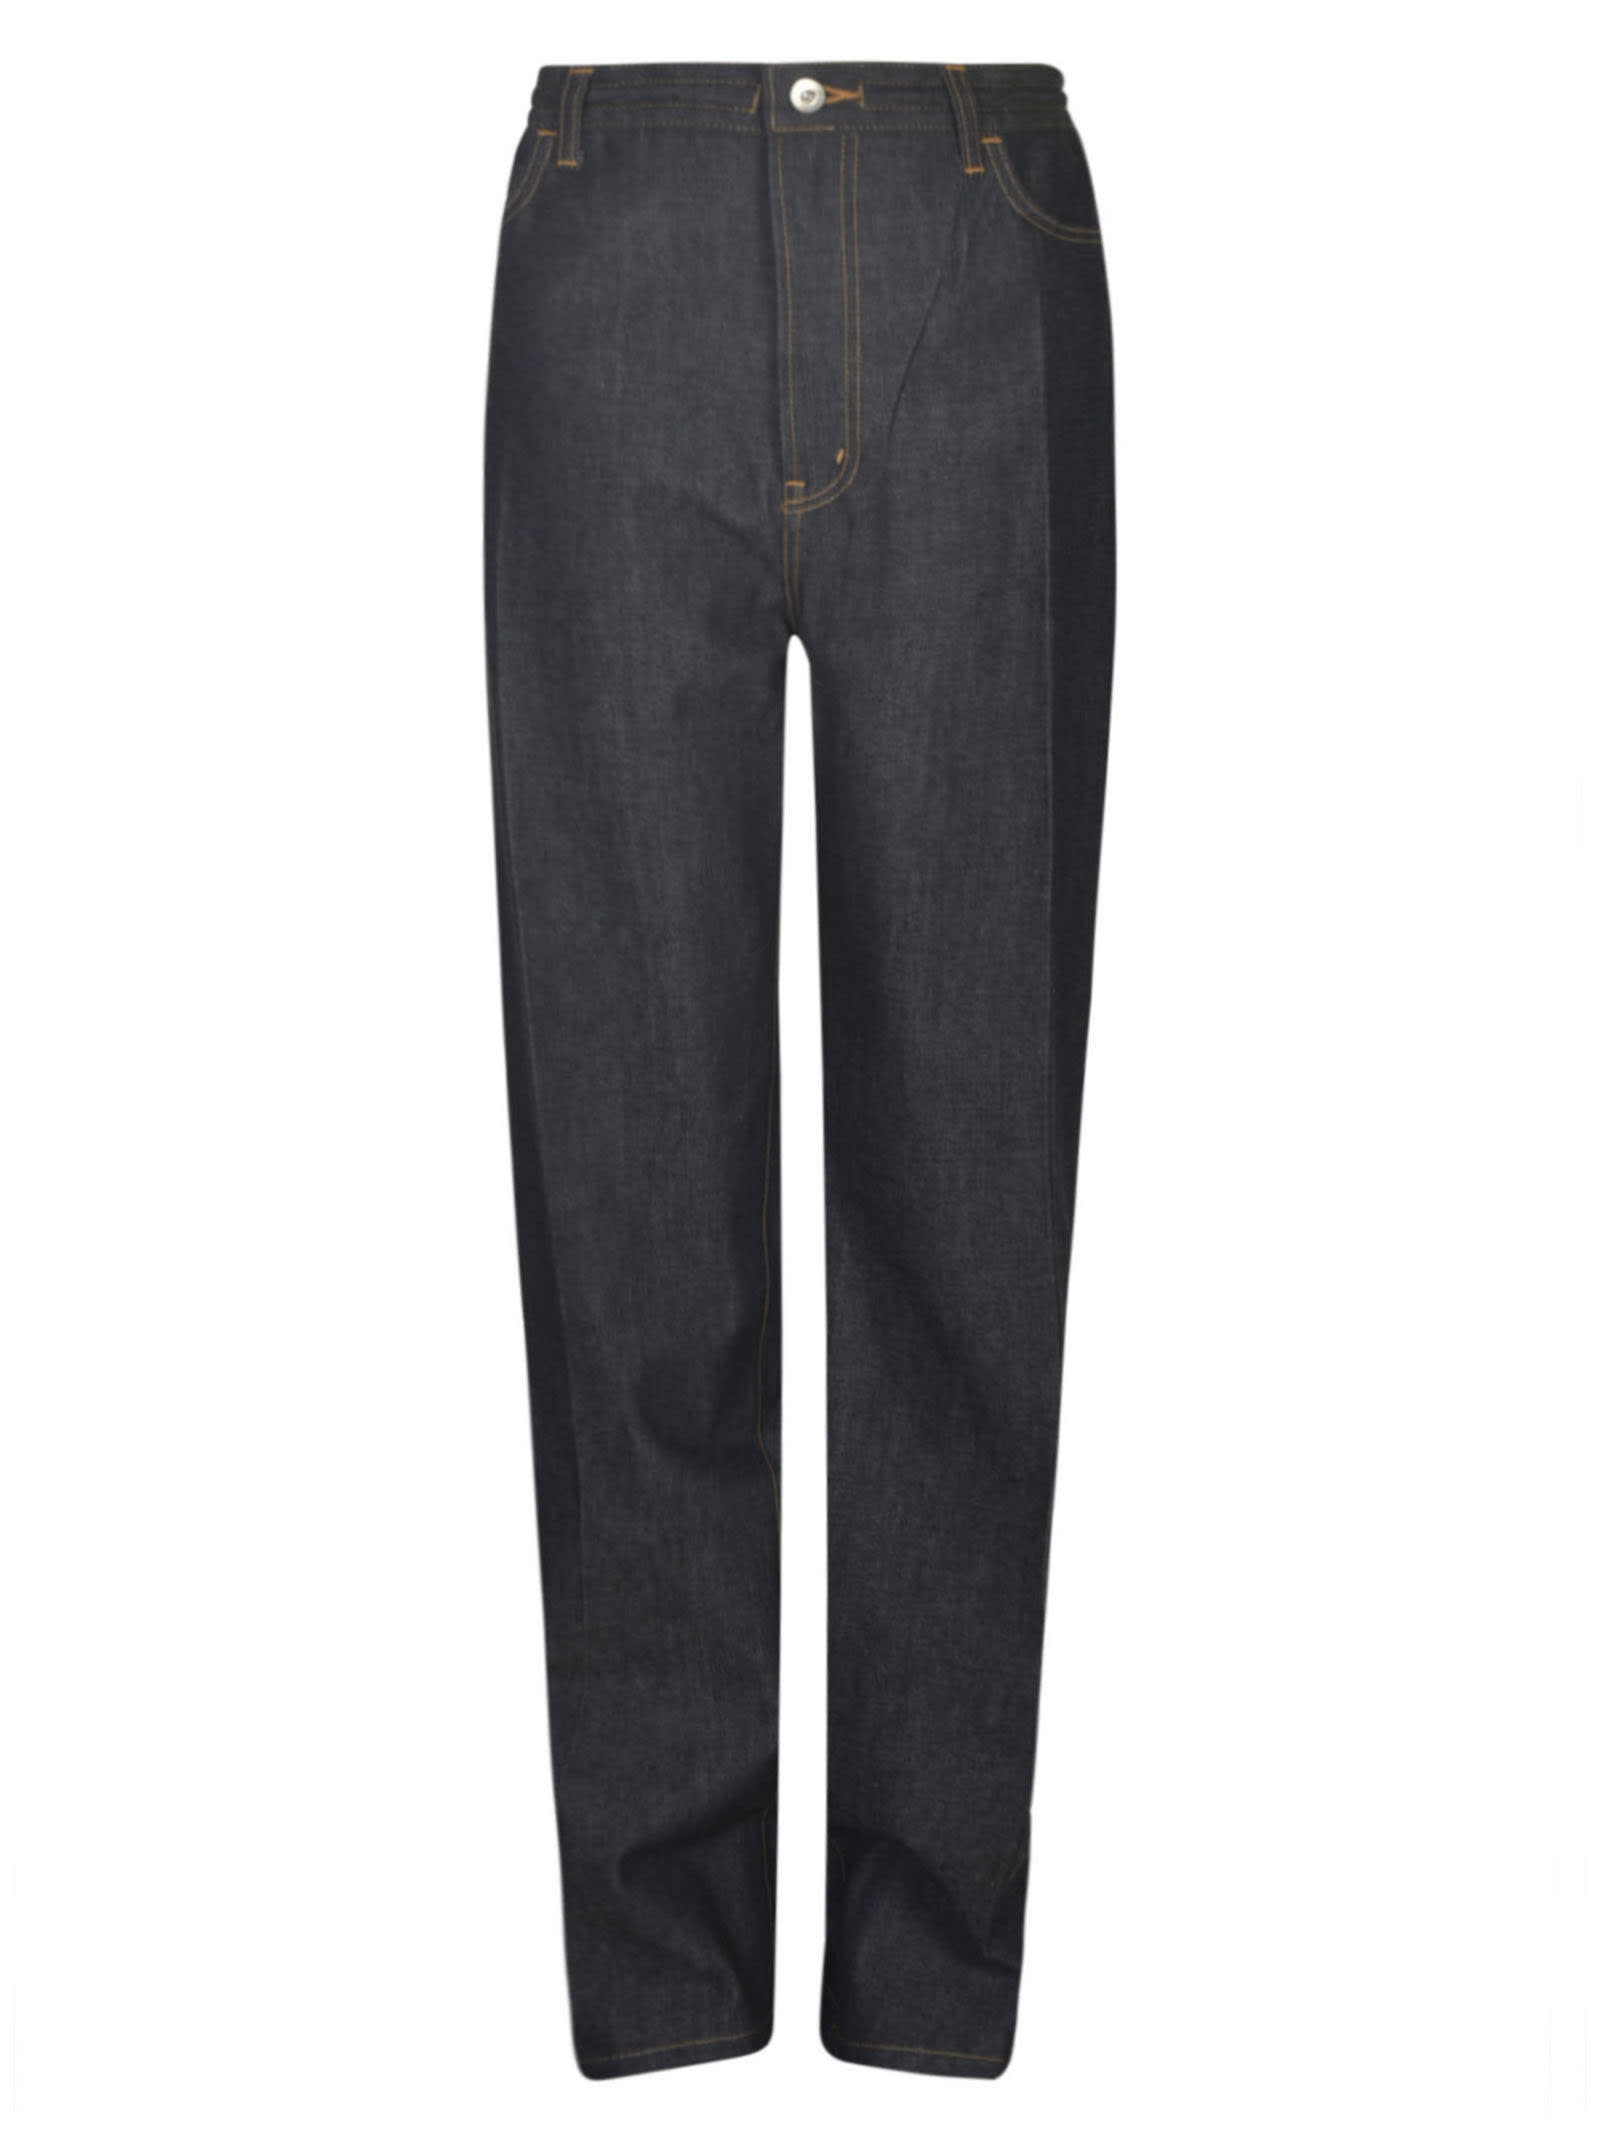 Long-length Buttoned Jeans